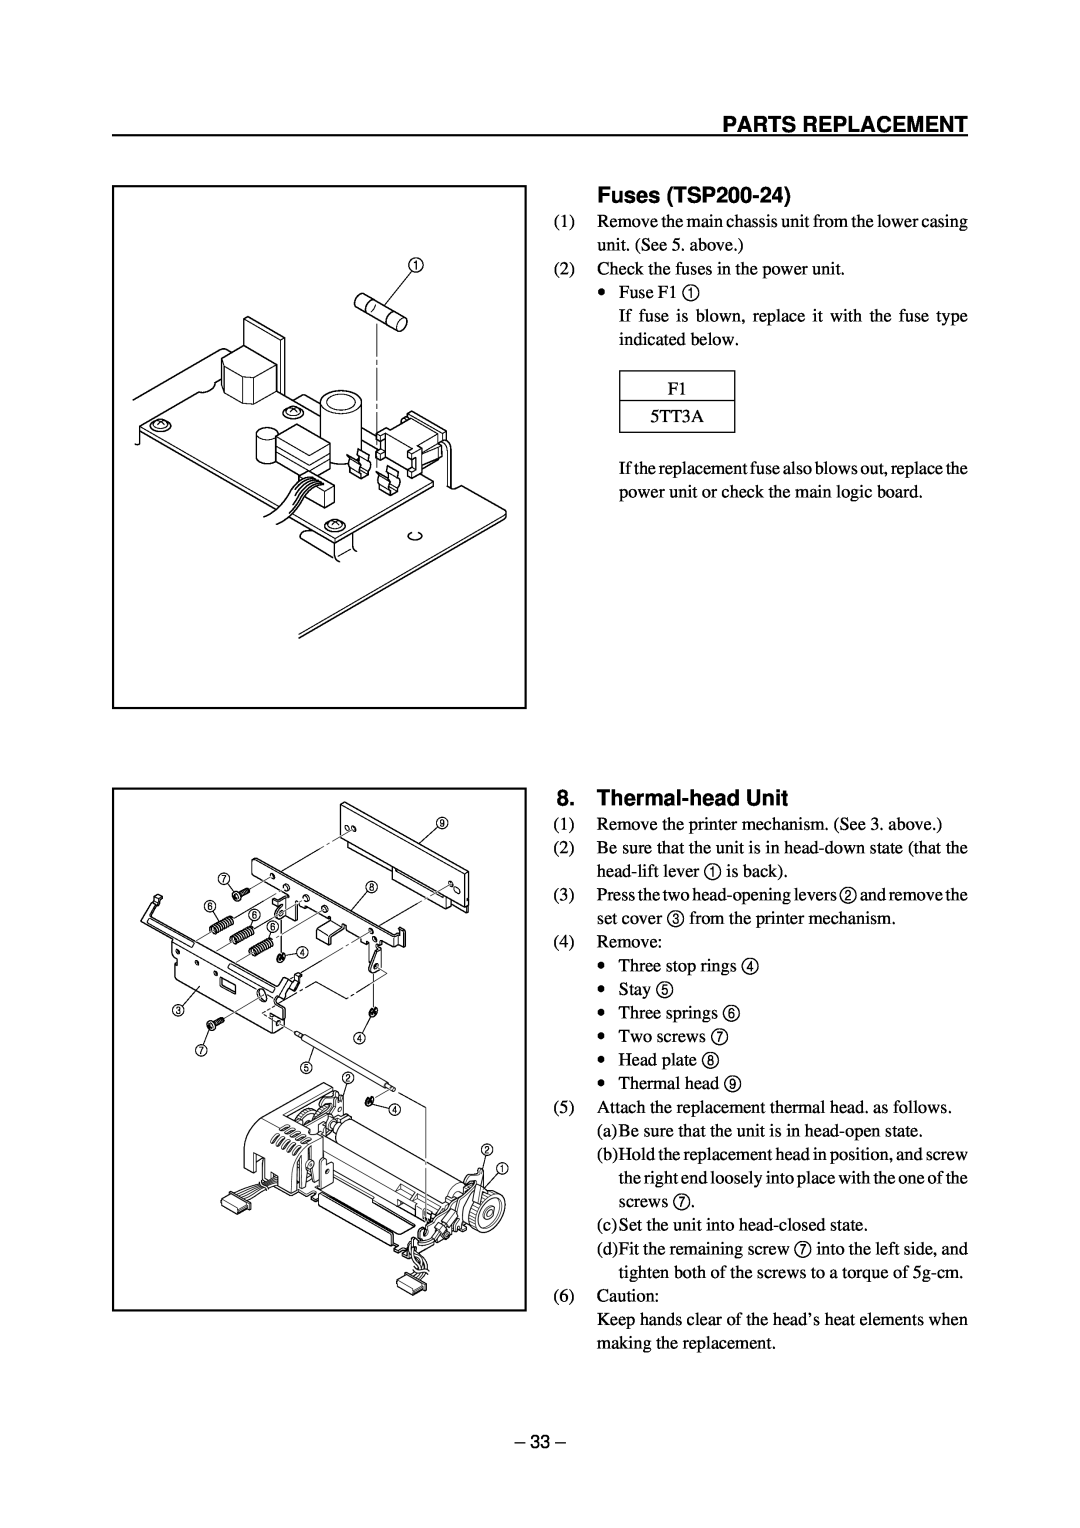 Star Micronics technical manual Fuses TSP200-24, Thermal-head Unit, Parts Replacement 